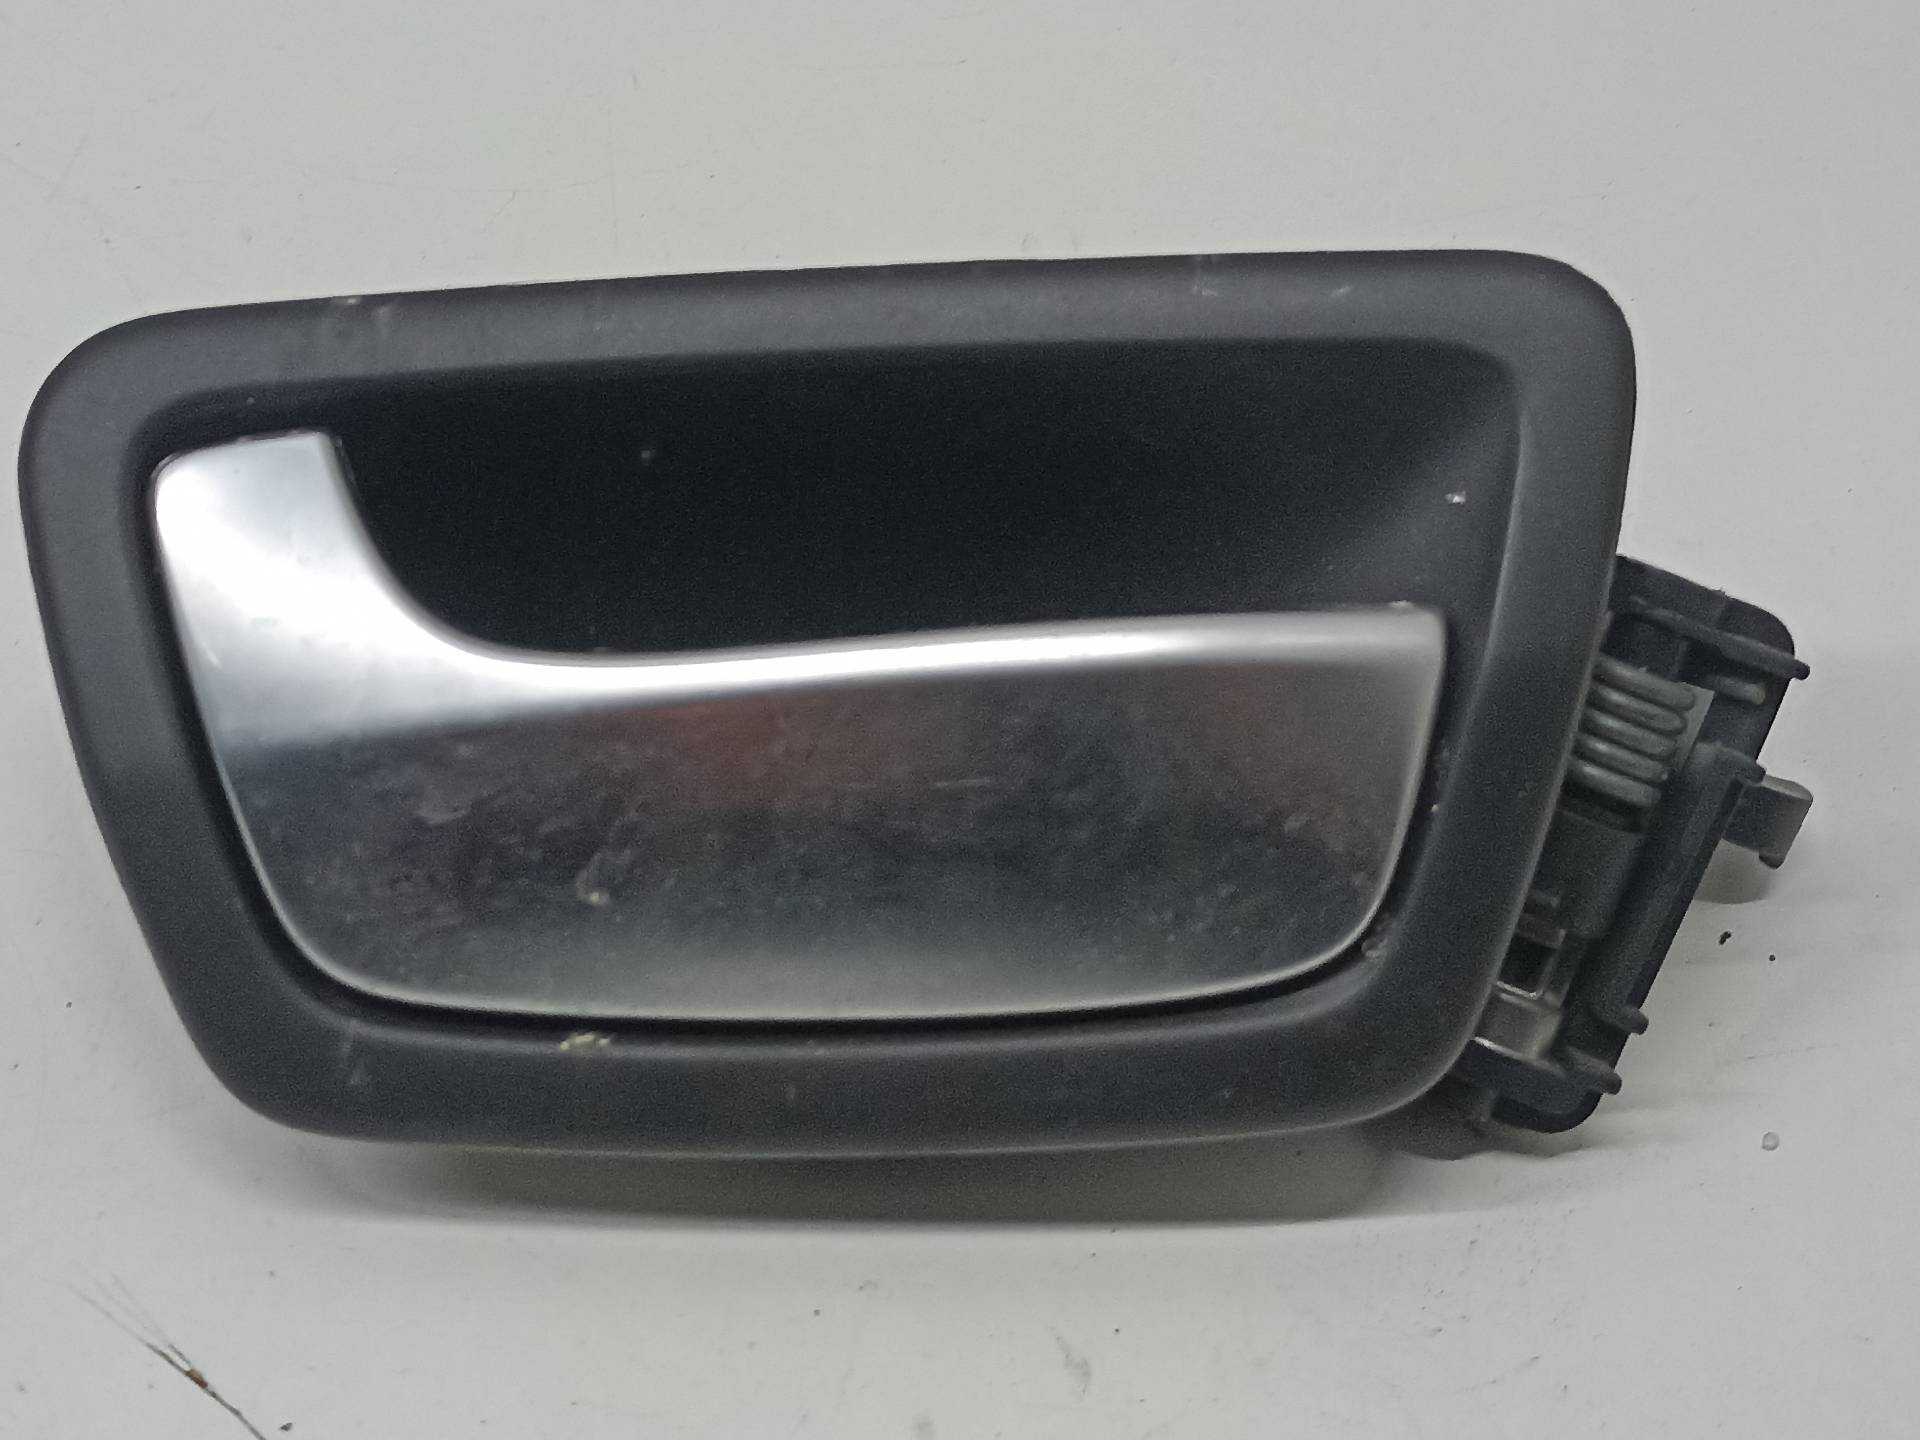 PEUGEOT 807 1 generation (2002-2012) Other Interior Parts 1484729077, 345054549145, 145 24316072